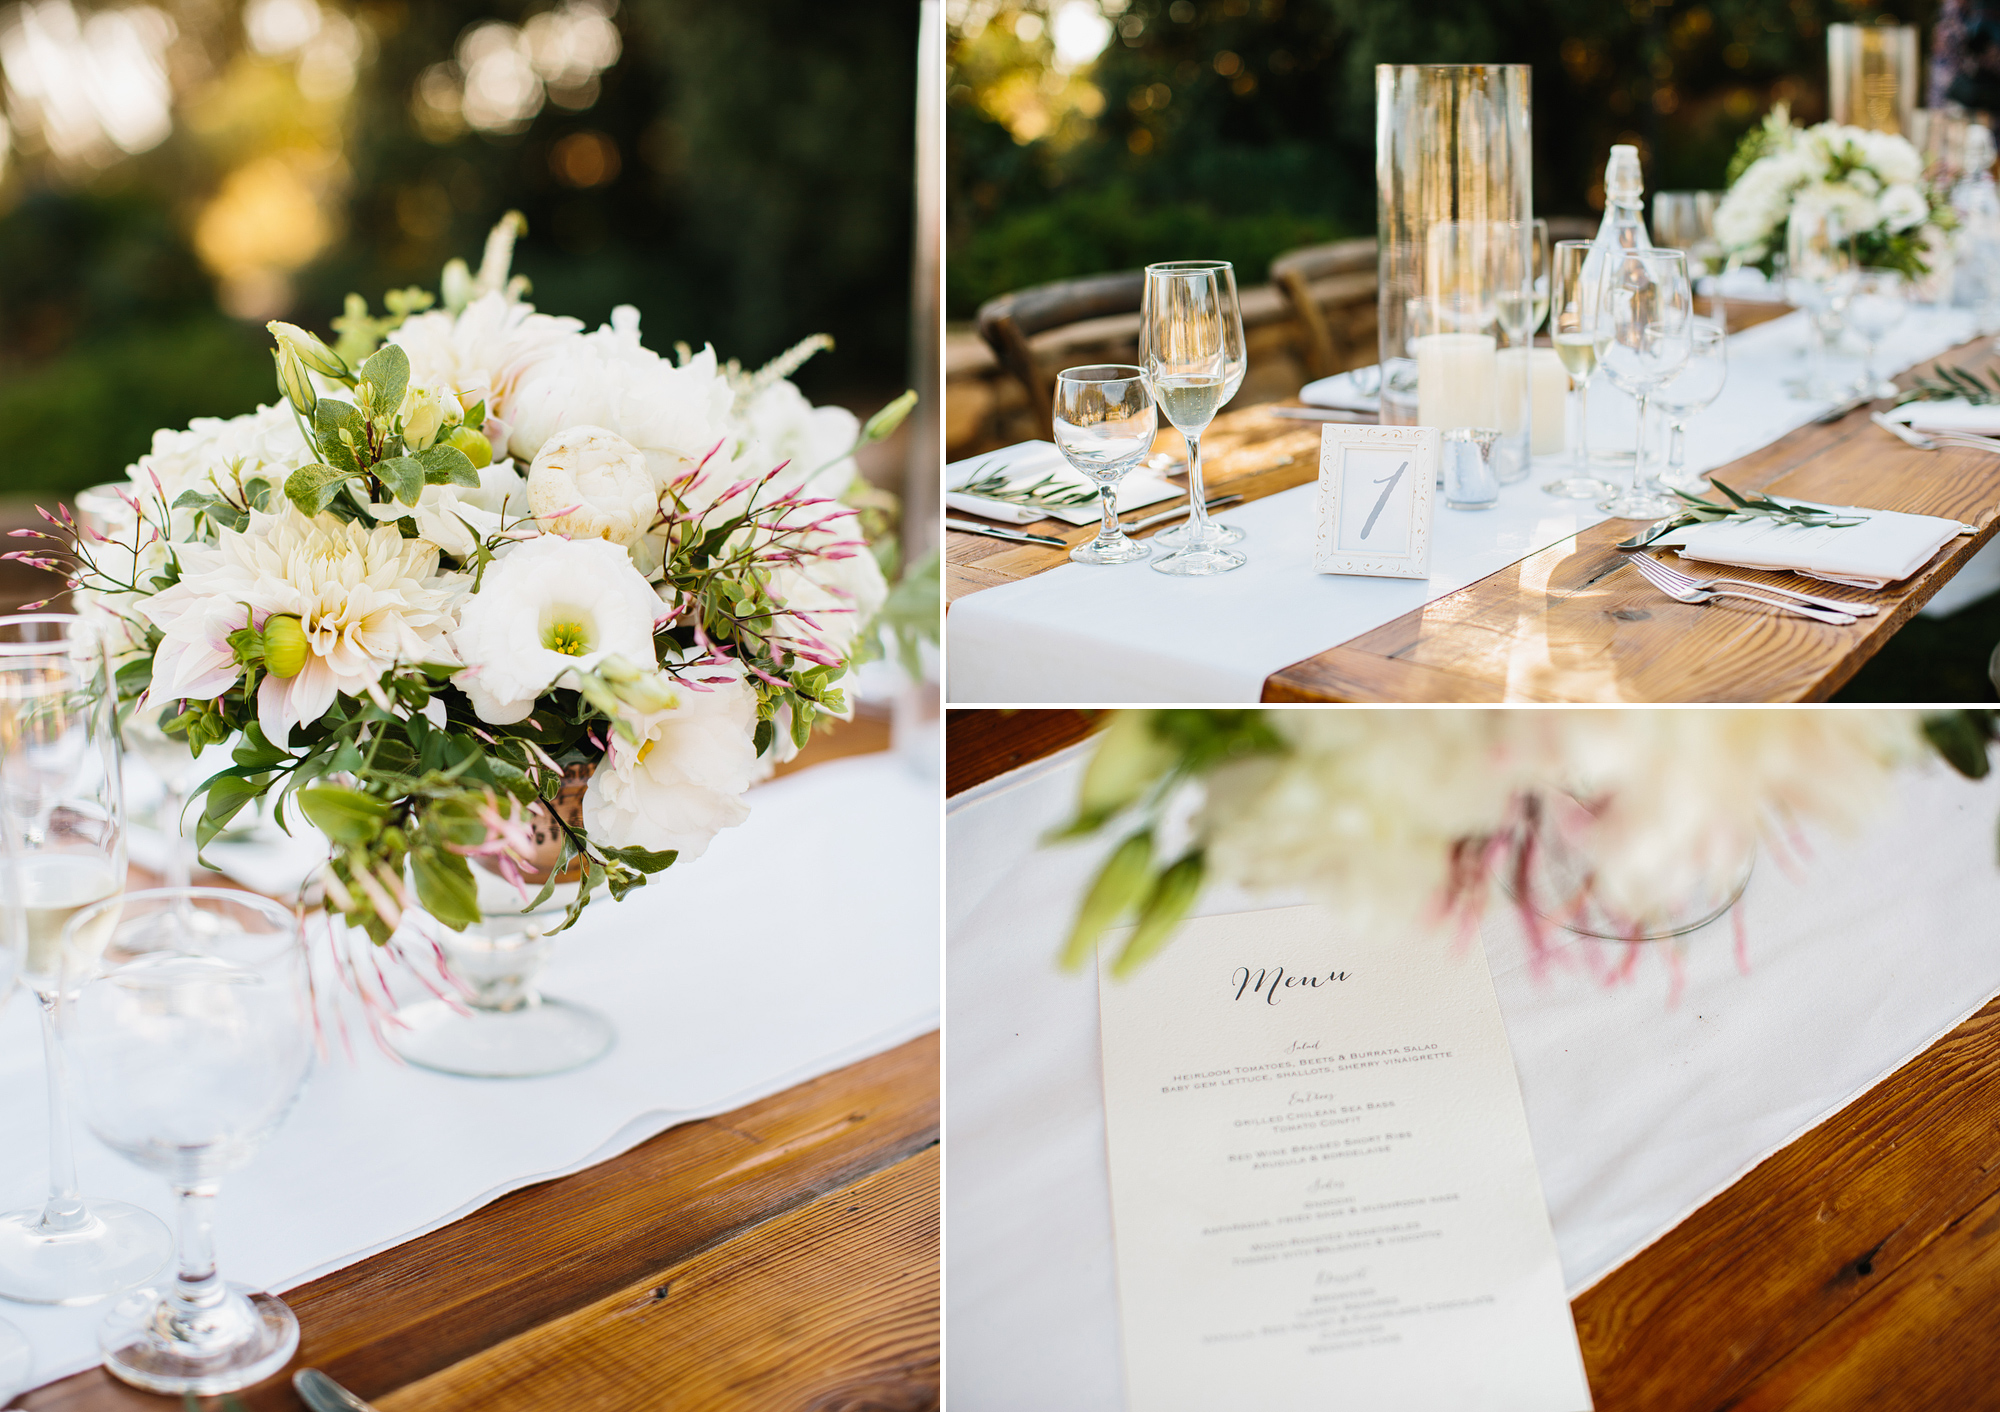 Photos of the beautiful table settings. 